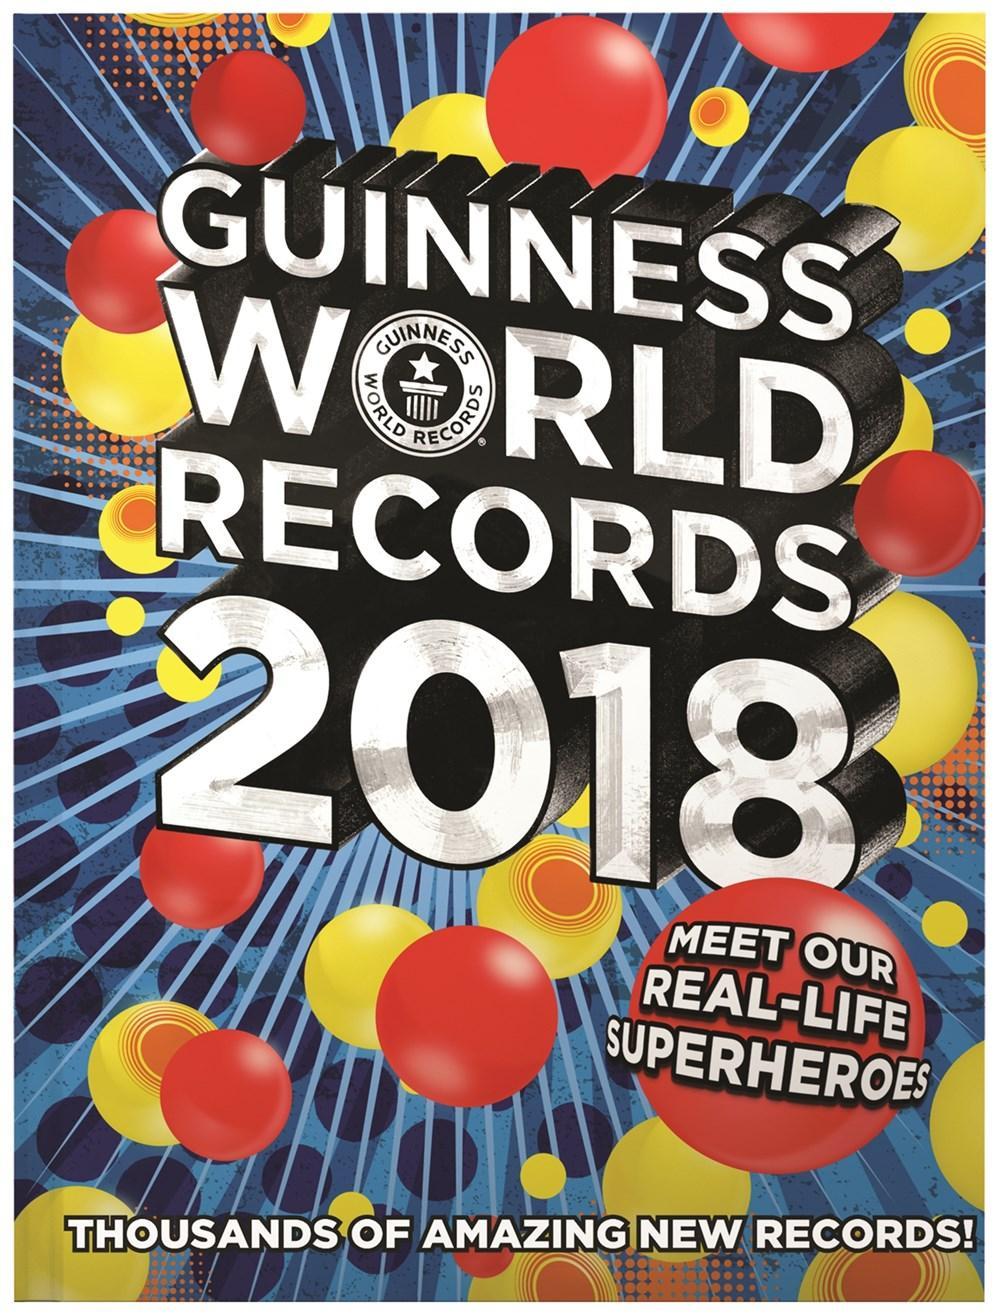 Guinness World Records 2018 Guinness World Records The record-breaking record book is back, packed with hundreds of never-before-seen photographs, thousands of superlative stats, facts and figures,